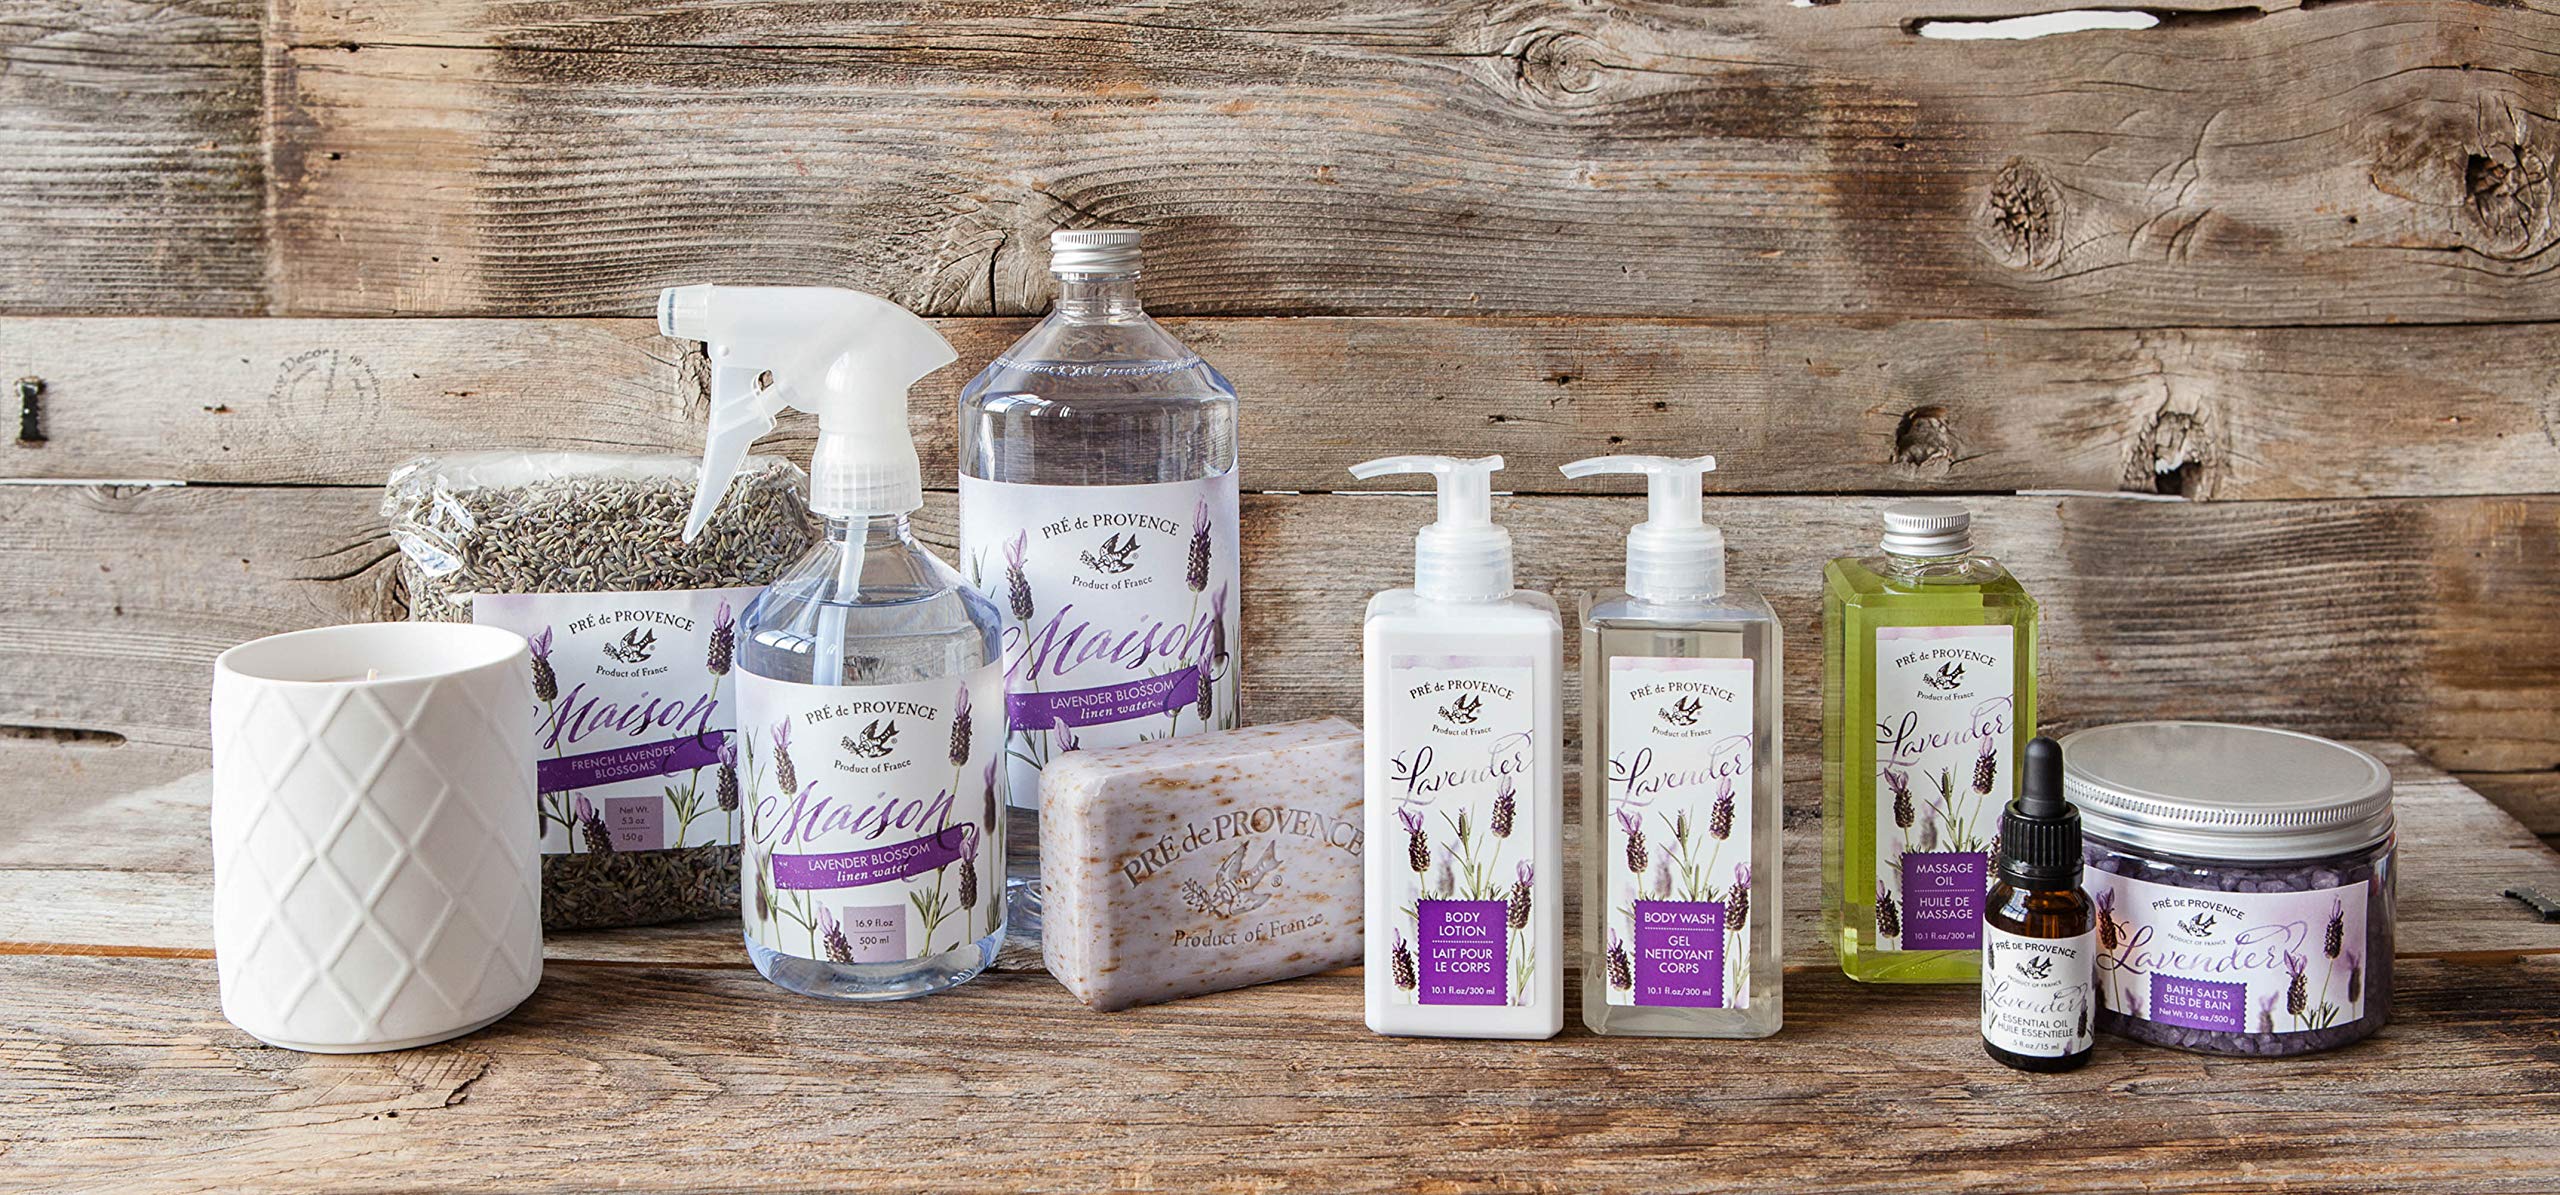 Pre de Provence Maison French Lavender Collection, Soothing & Fresh Scent, Linen Water with Sprayer, 500 ML